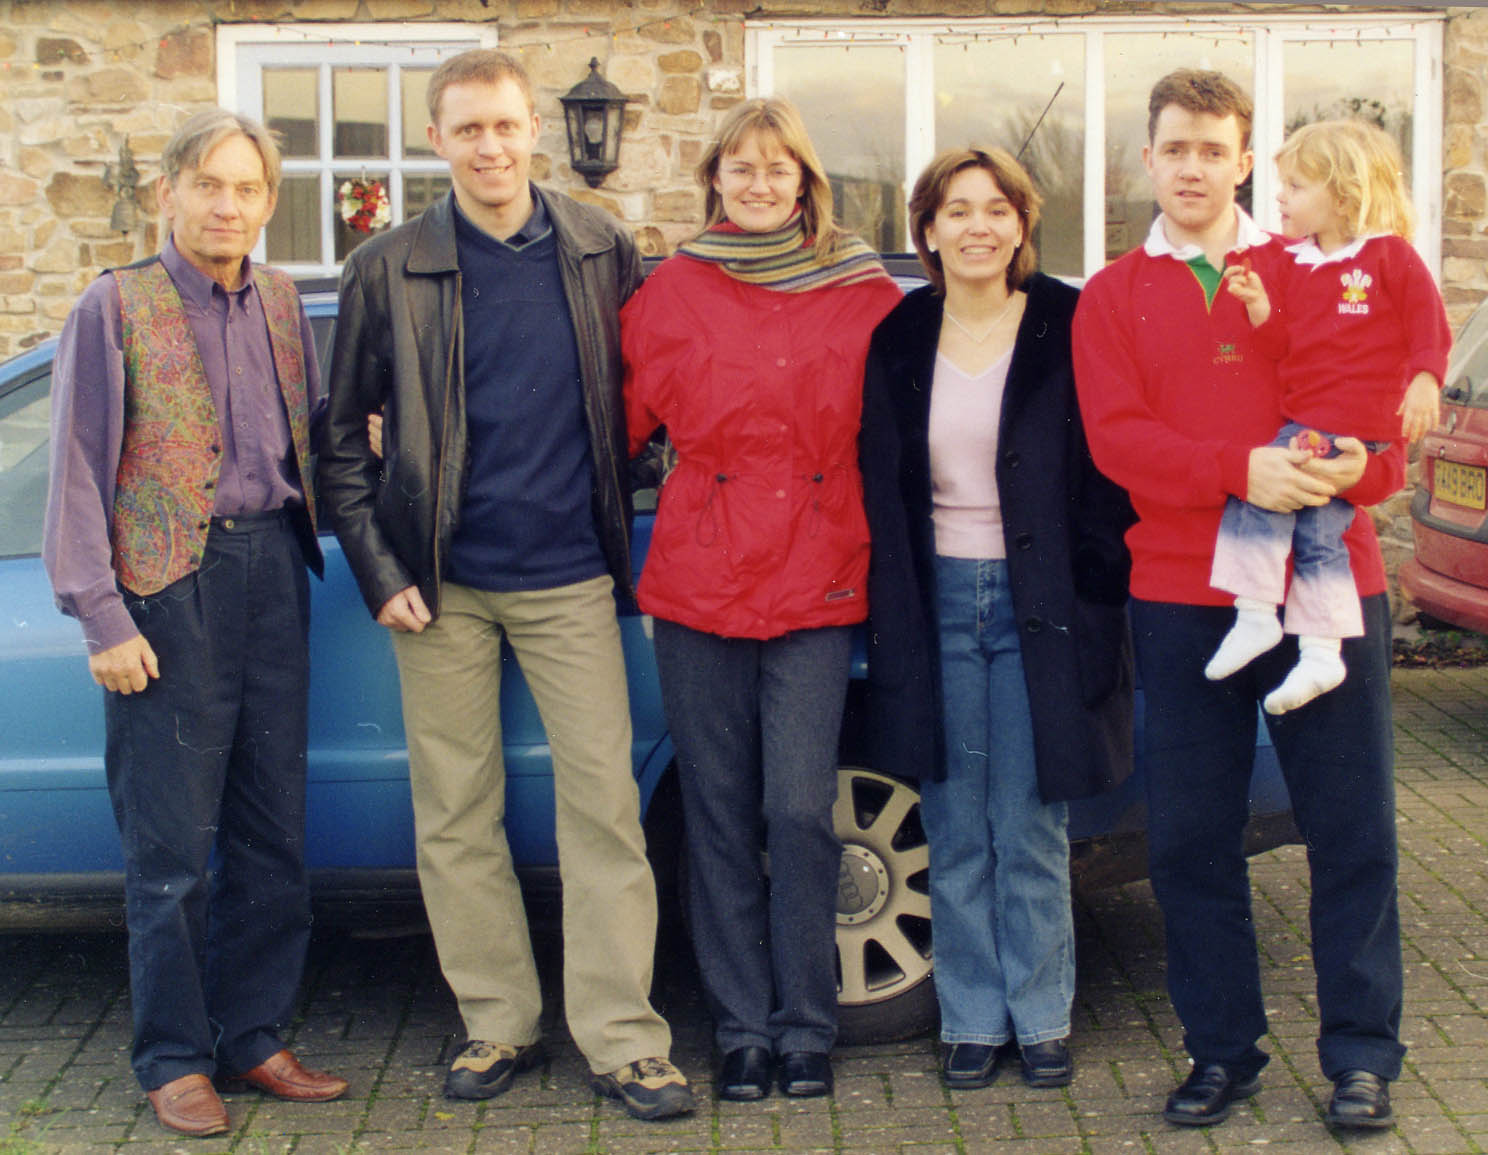 a row of people standing in front of a blue car in front of a stone wall and windows: John at far left, wearing jeans, a purple shirt and autumnal waistcoat; then a young man with John\'s features but nearly a head taller; two young women and another young man holding a blonde child about four years old